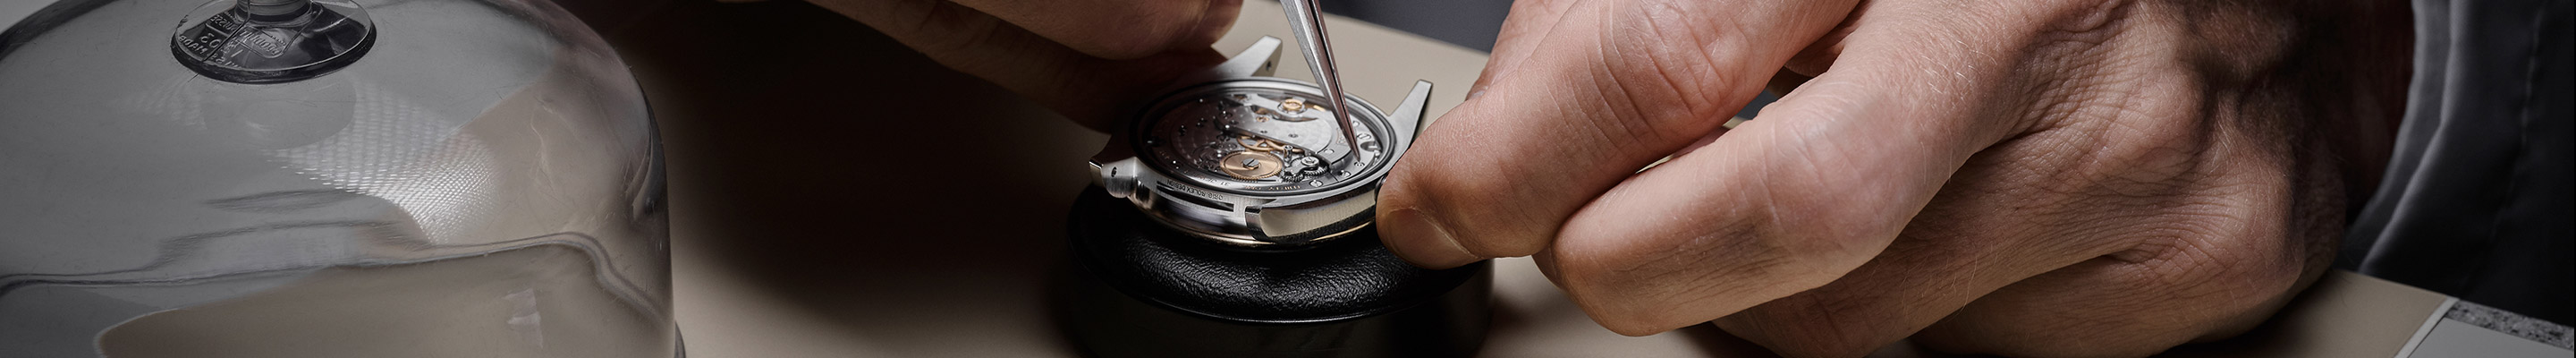 ROLEX WATCH SERVICING AND REPAIR AT ROMAN JEWELERS